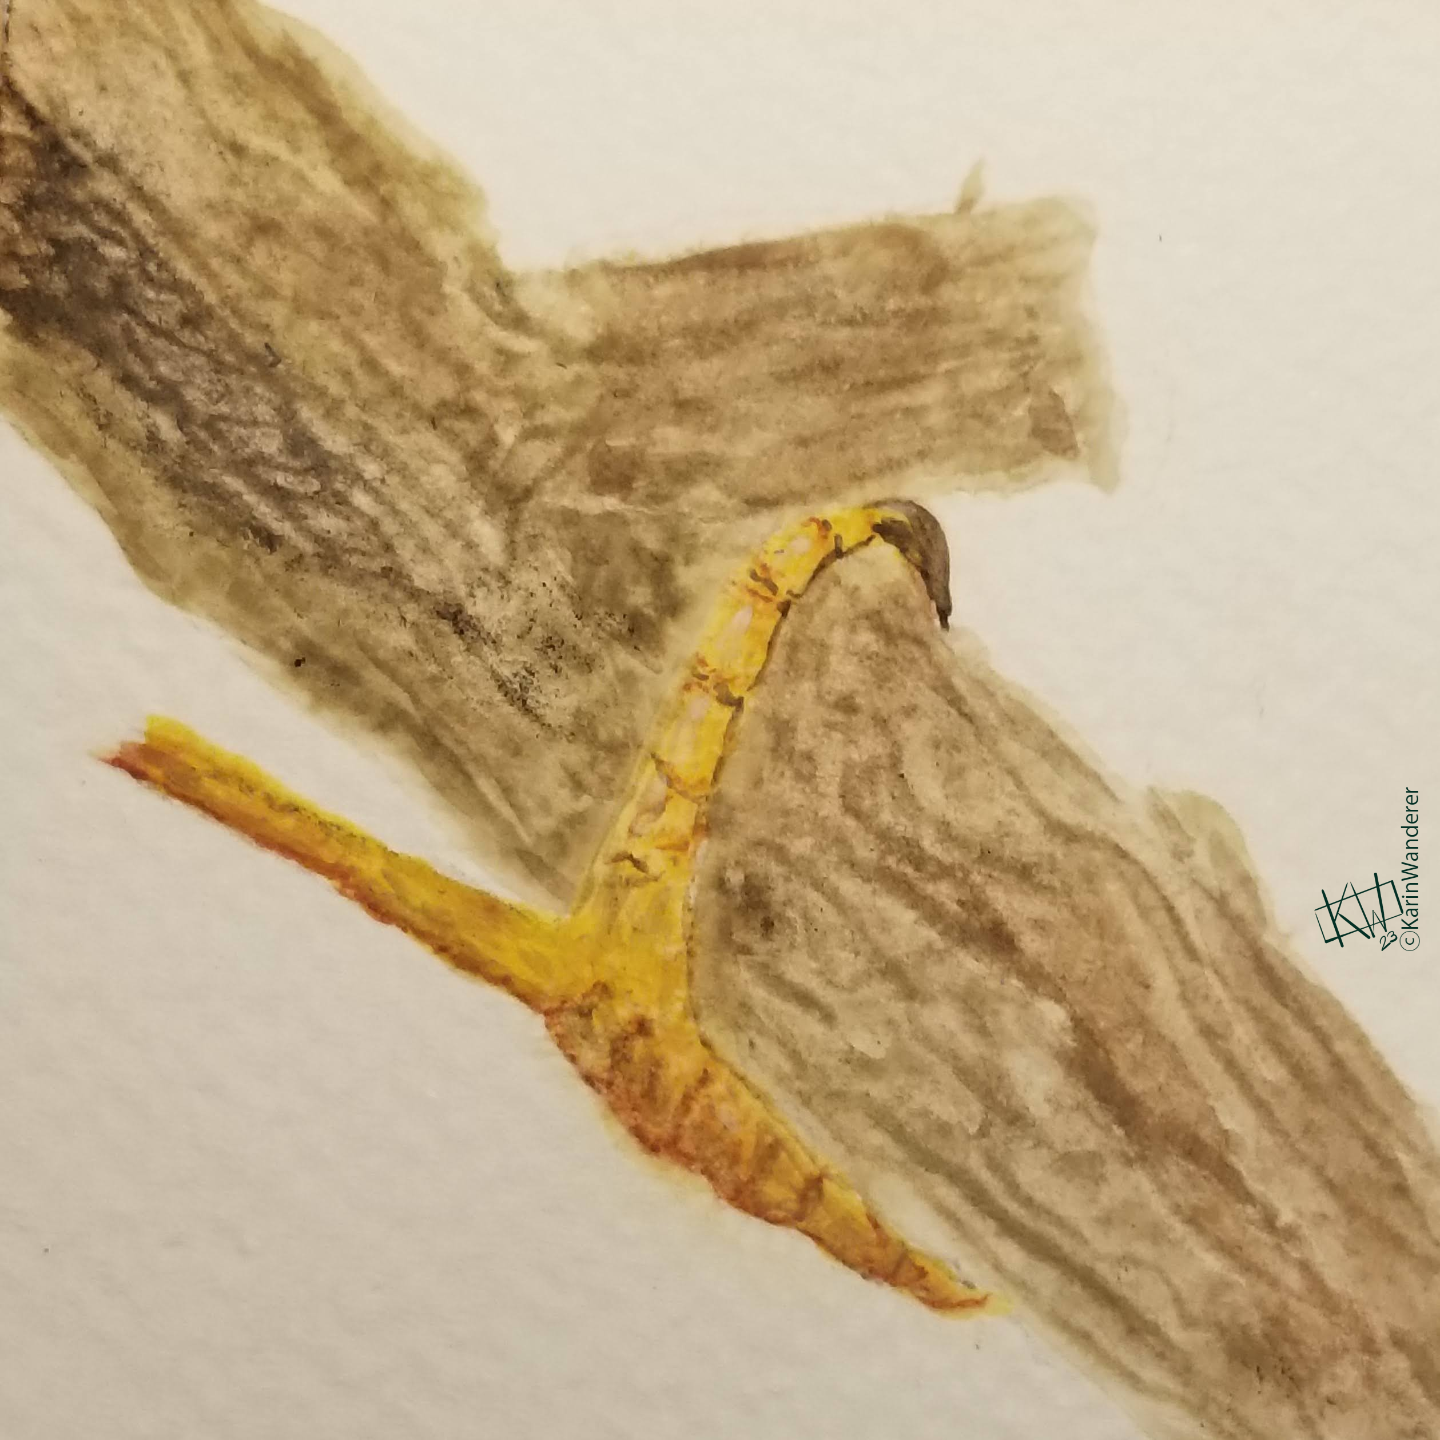 Watercolor branch with a bird of prey's talon clutching it (rest of bird is not pictured).